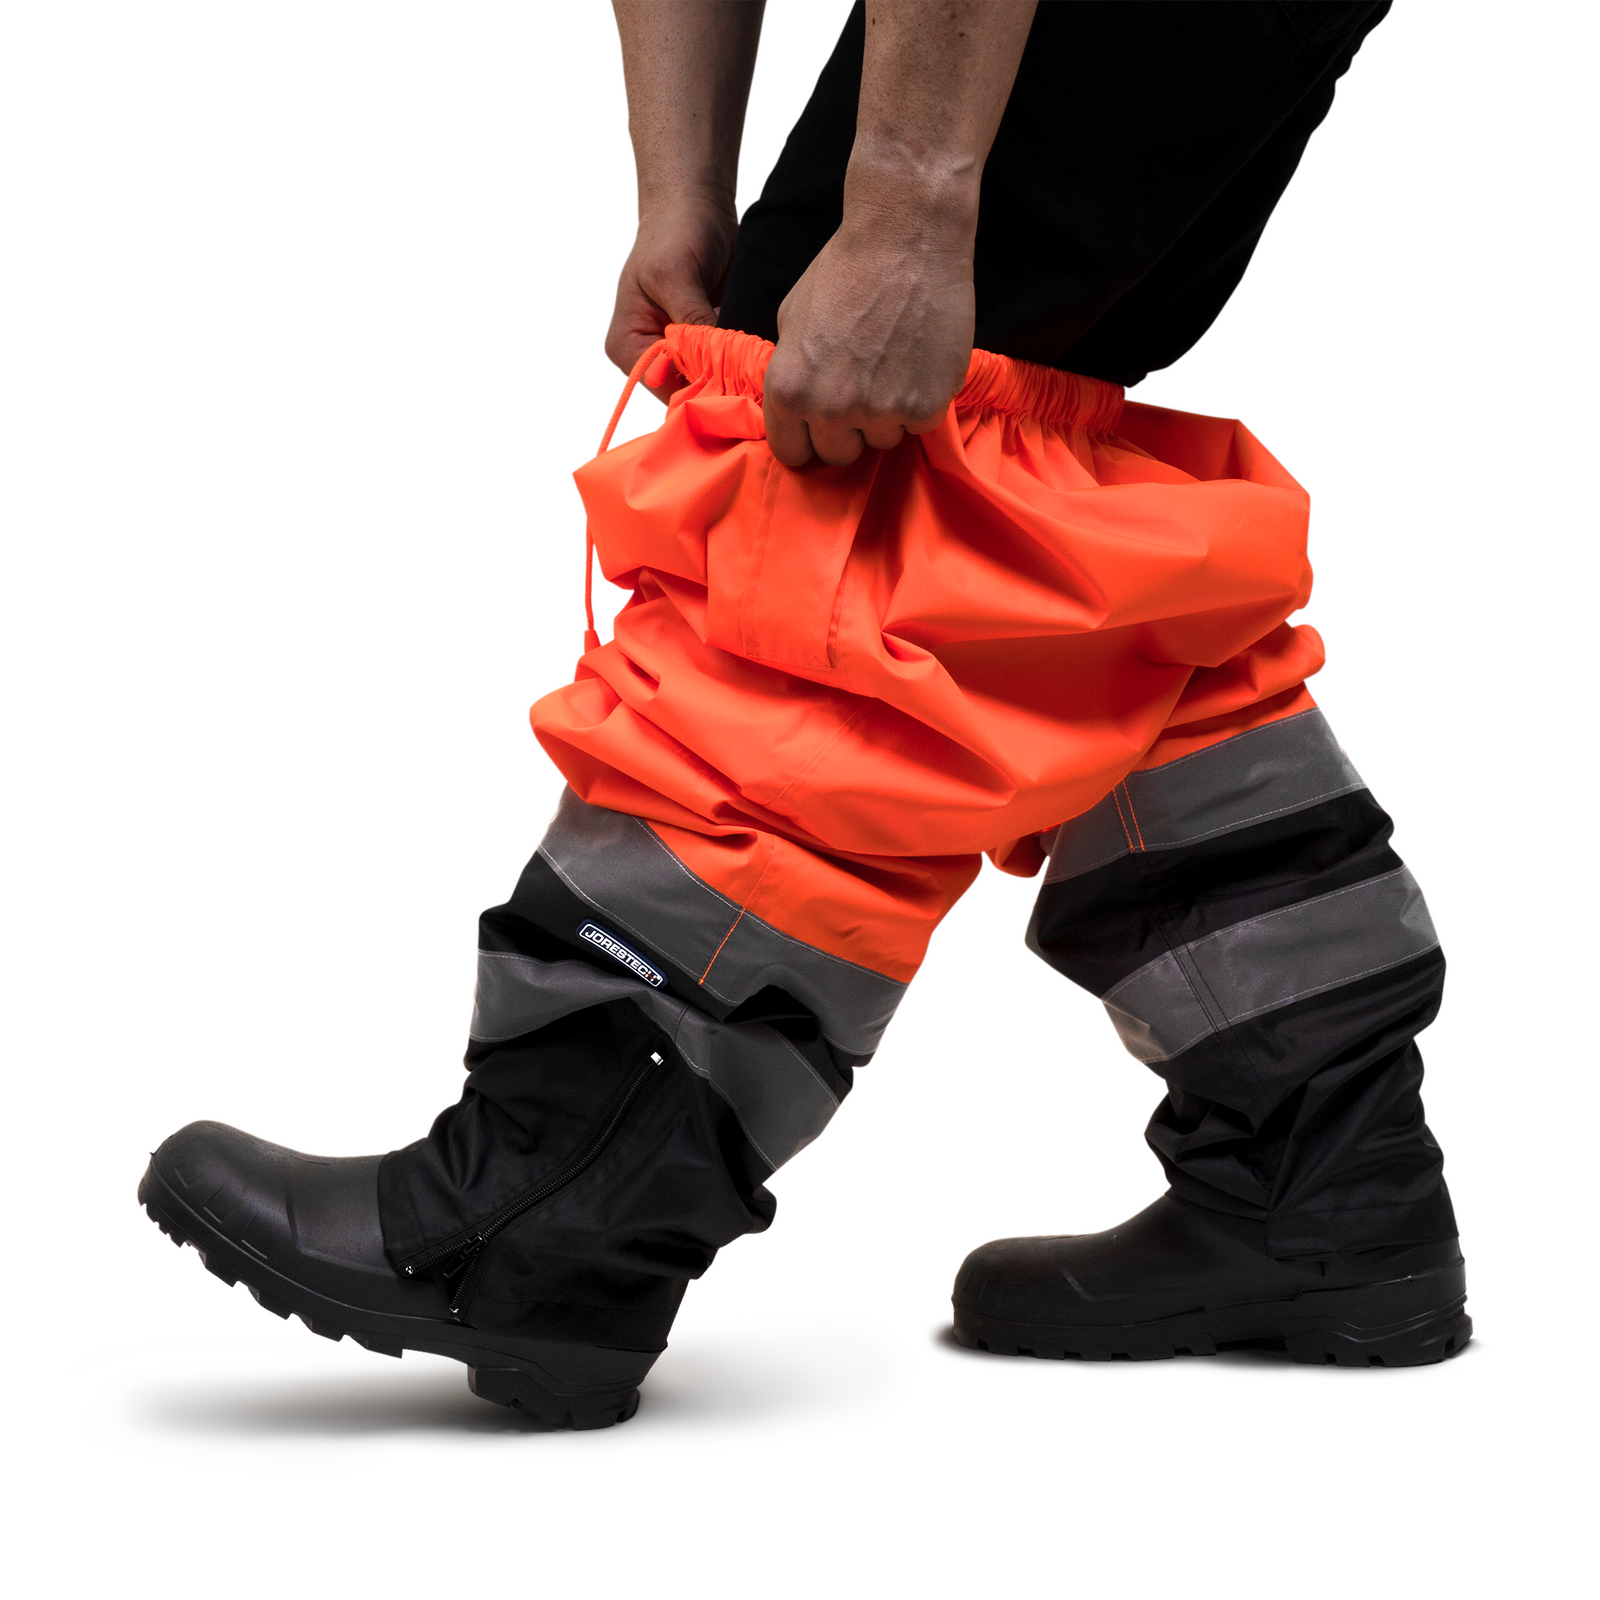 A person putting on the JORESTECH orange and black safety rain pants as a rain protection layer on top of his own clothing